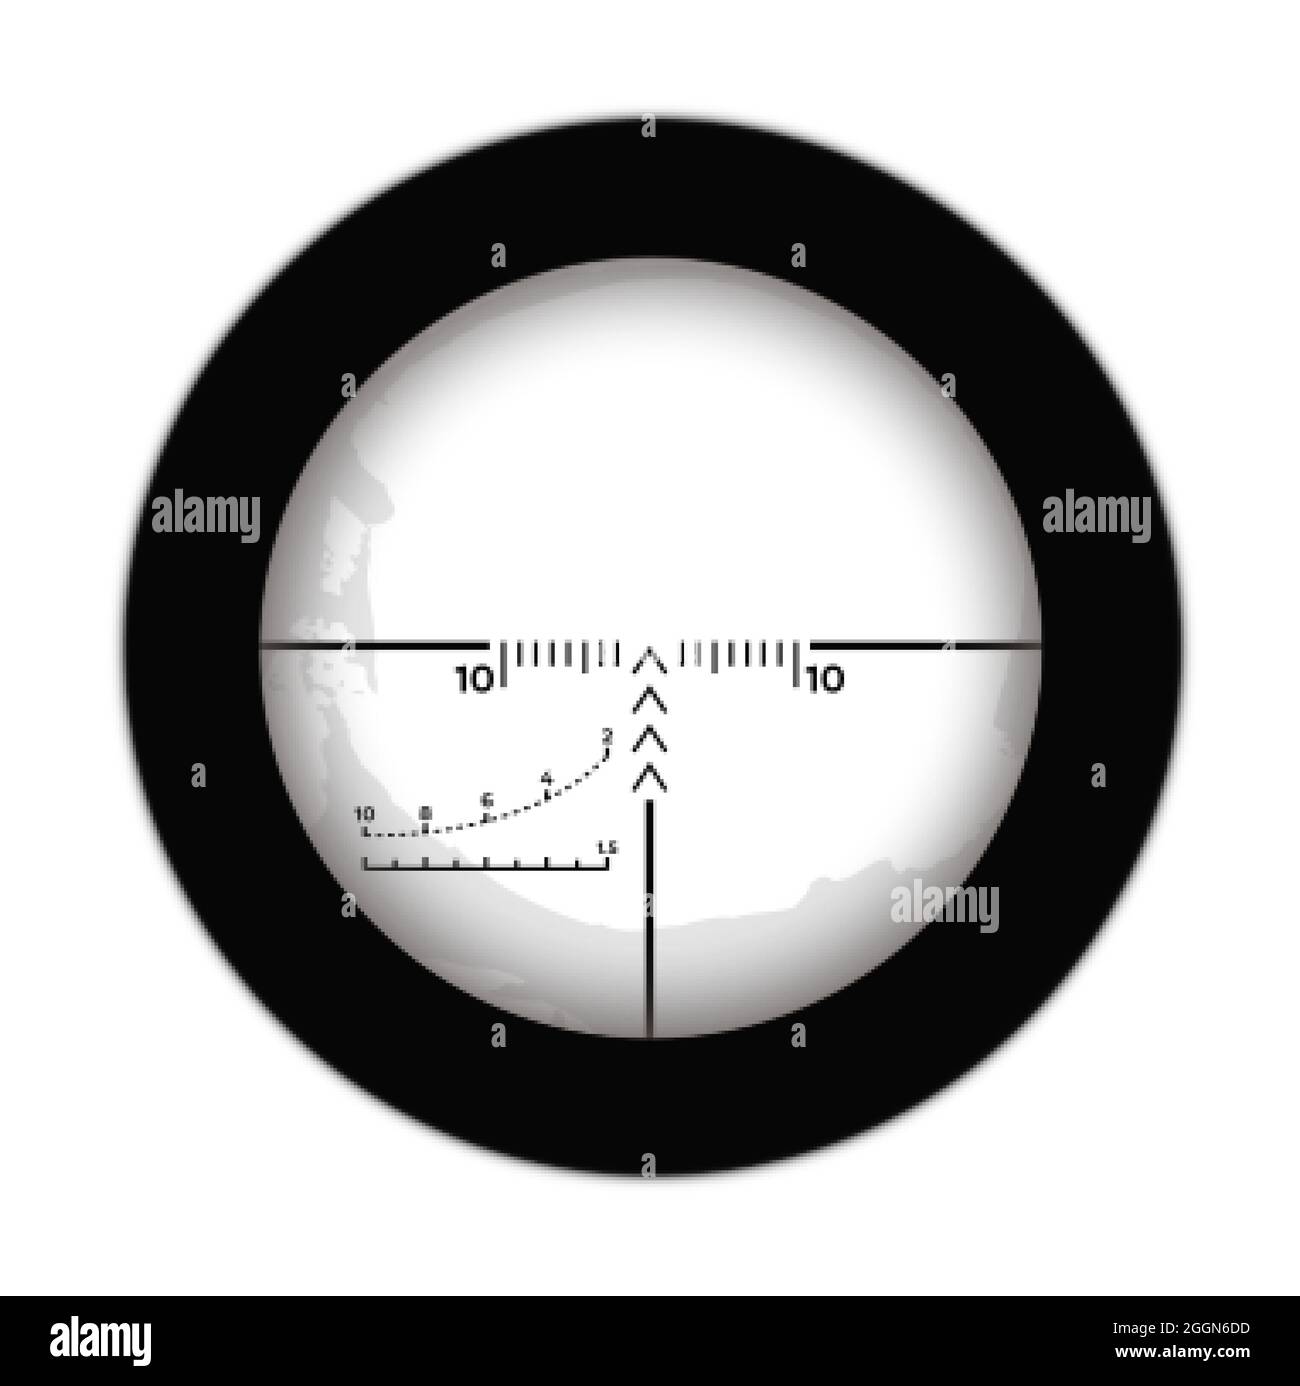 Crosshairs of a sniper scope reticle. Cross hairs of a rifle gun aiming optical viewfinder Stock Vector